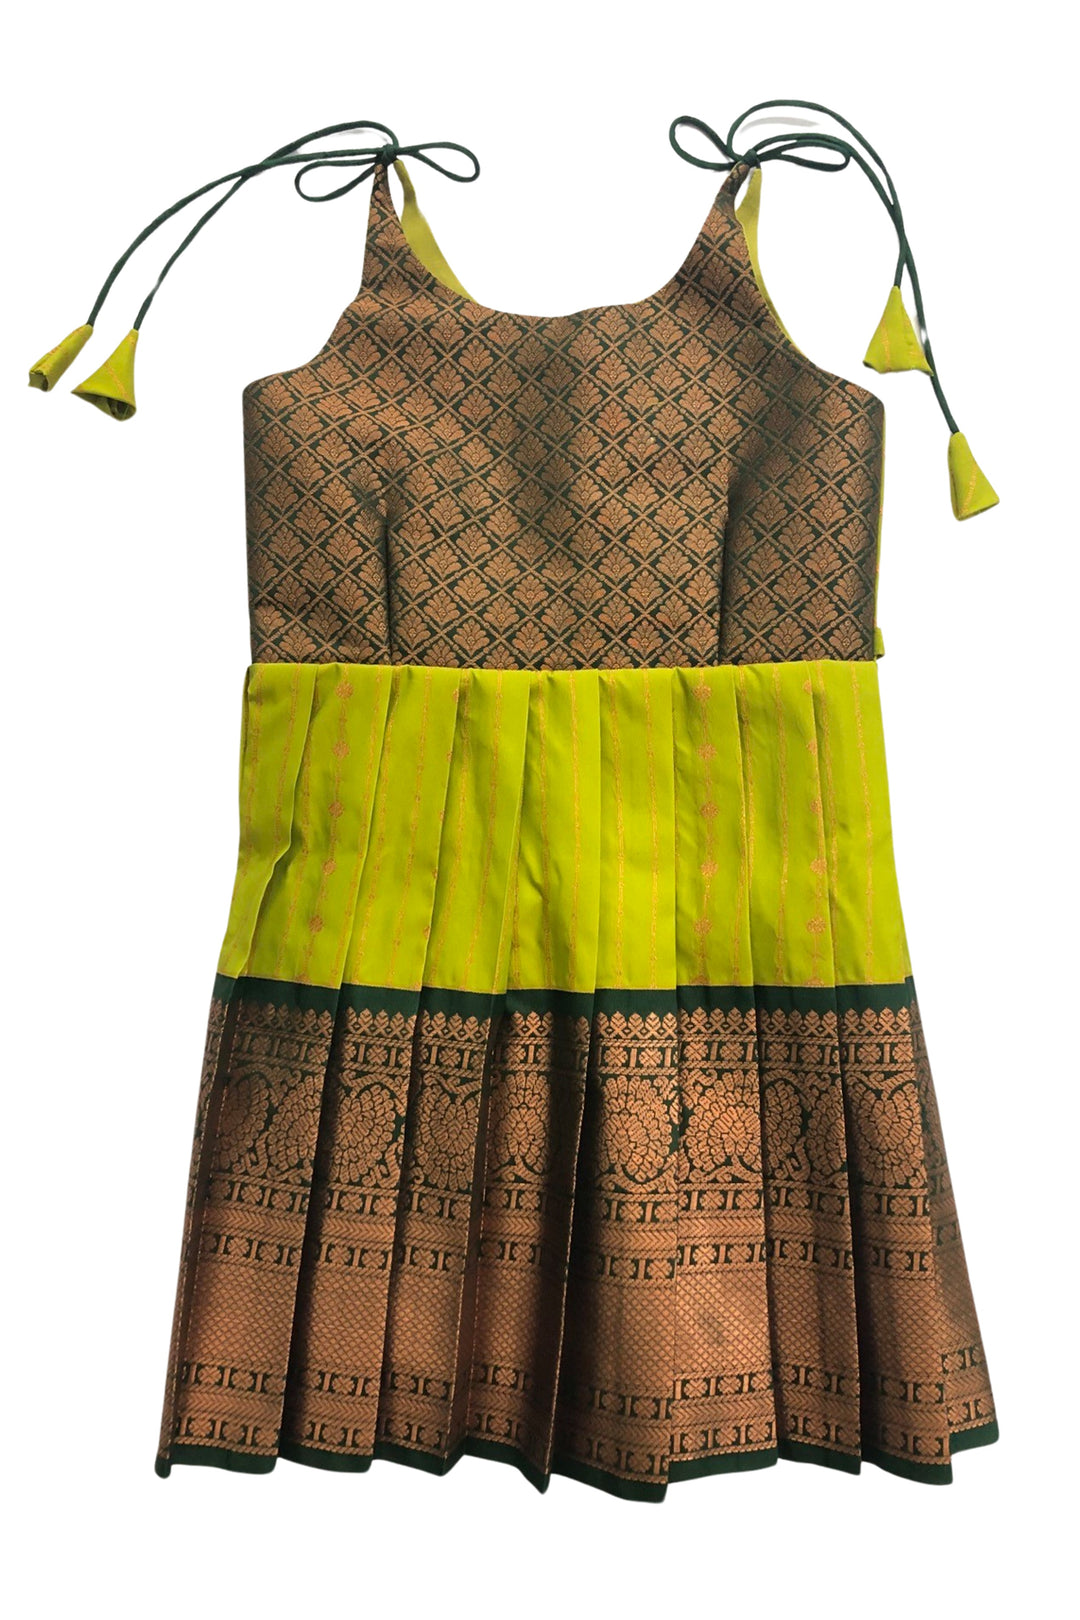 The Nesavu Tie Up Frock Vibrant Lime and Cocoa Silk Tie-Up Frock – Exotic Fusion Fashion Nesavu 18 (2Y) / Green / Style 1 T319A-18 Lime & Cocoa Silk Frock | Trendy Geometric Print Tie-Up Dress | The Nesavu